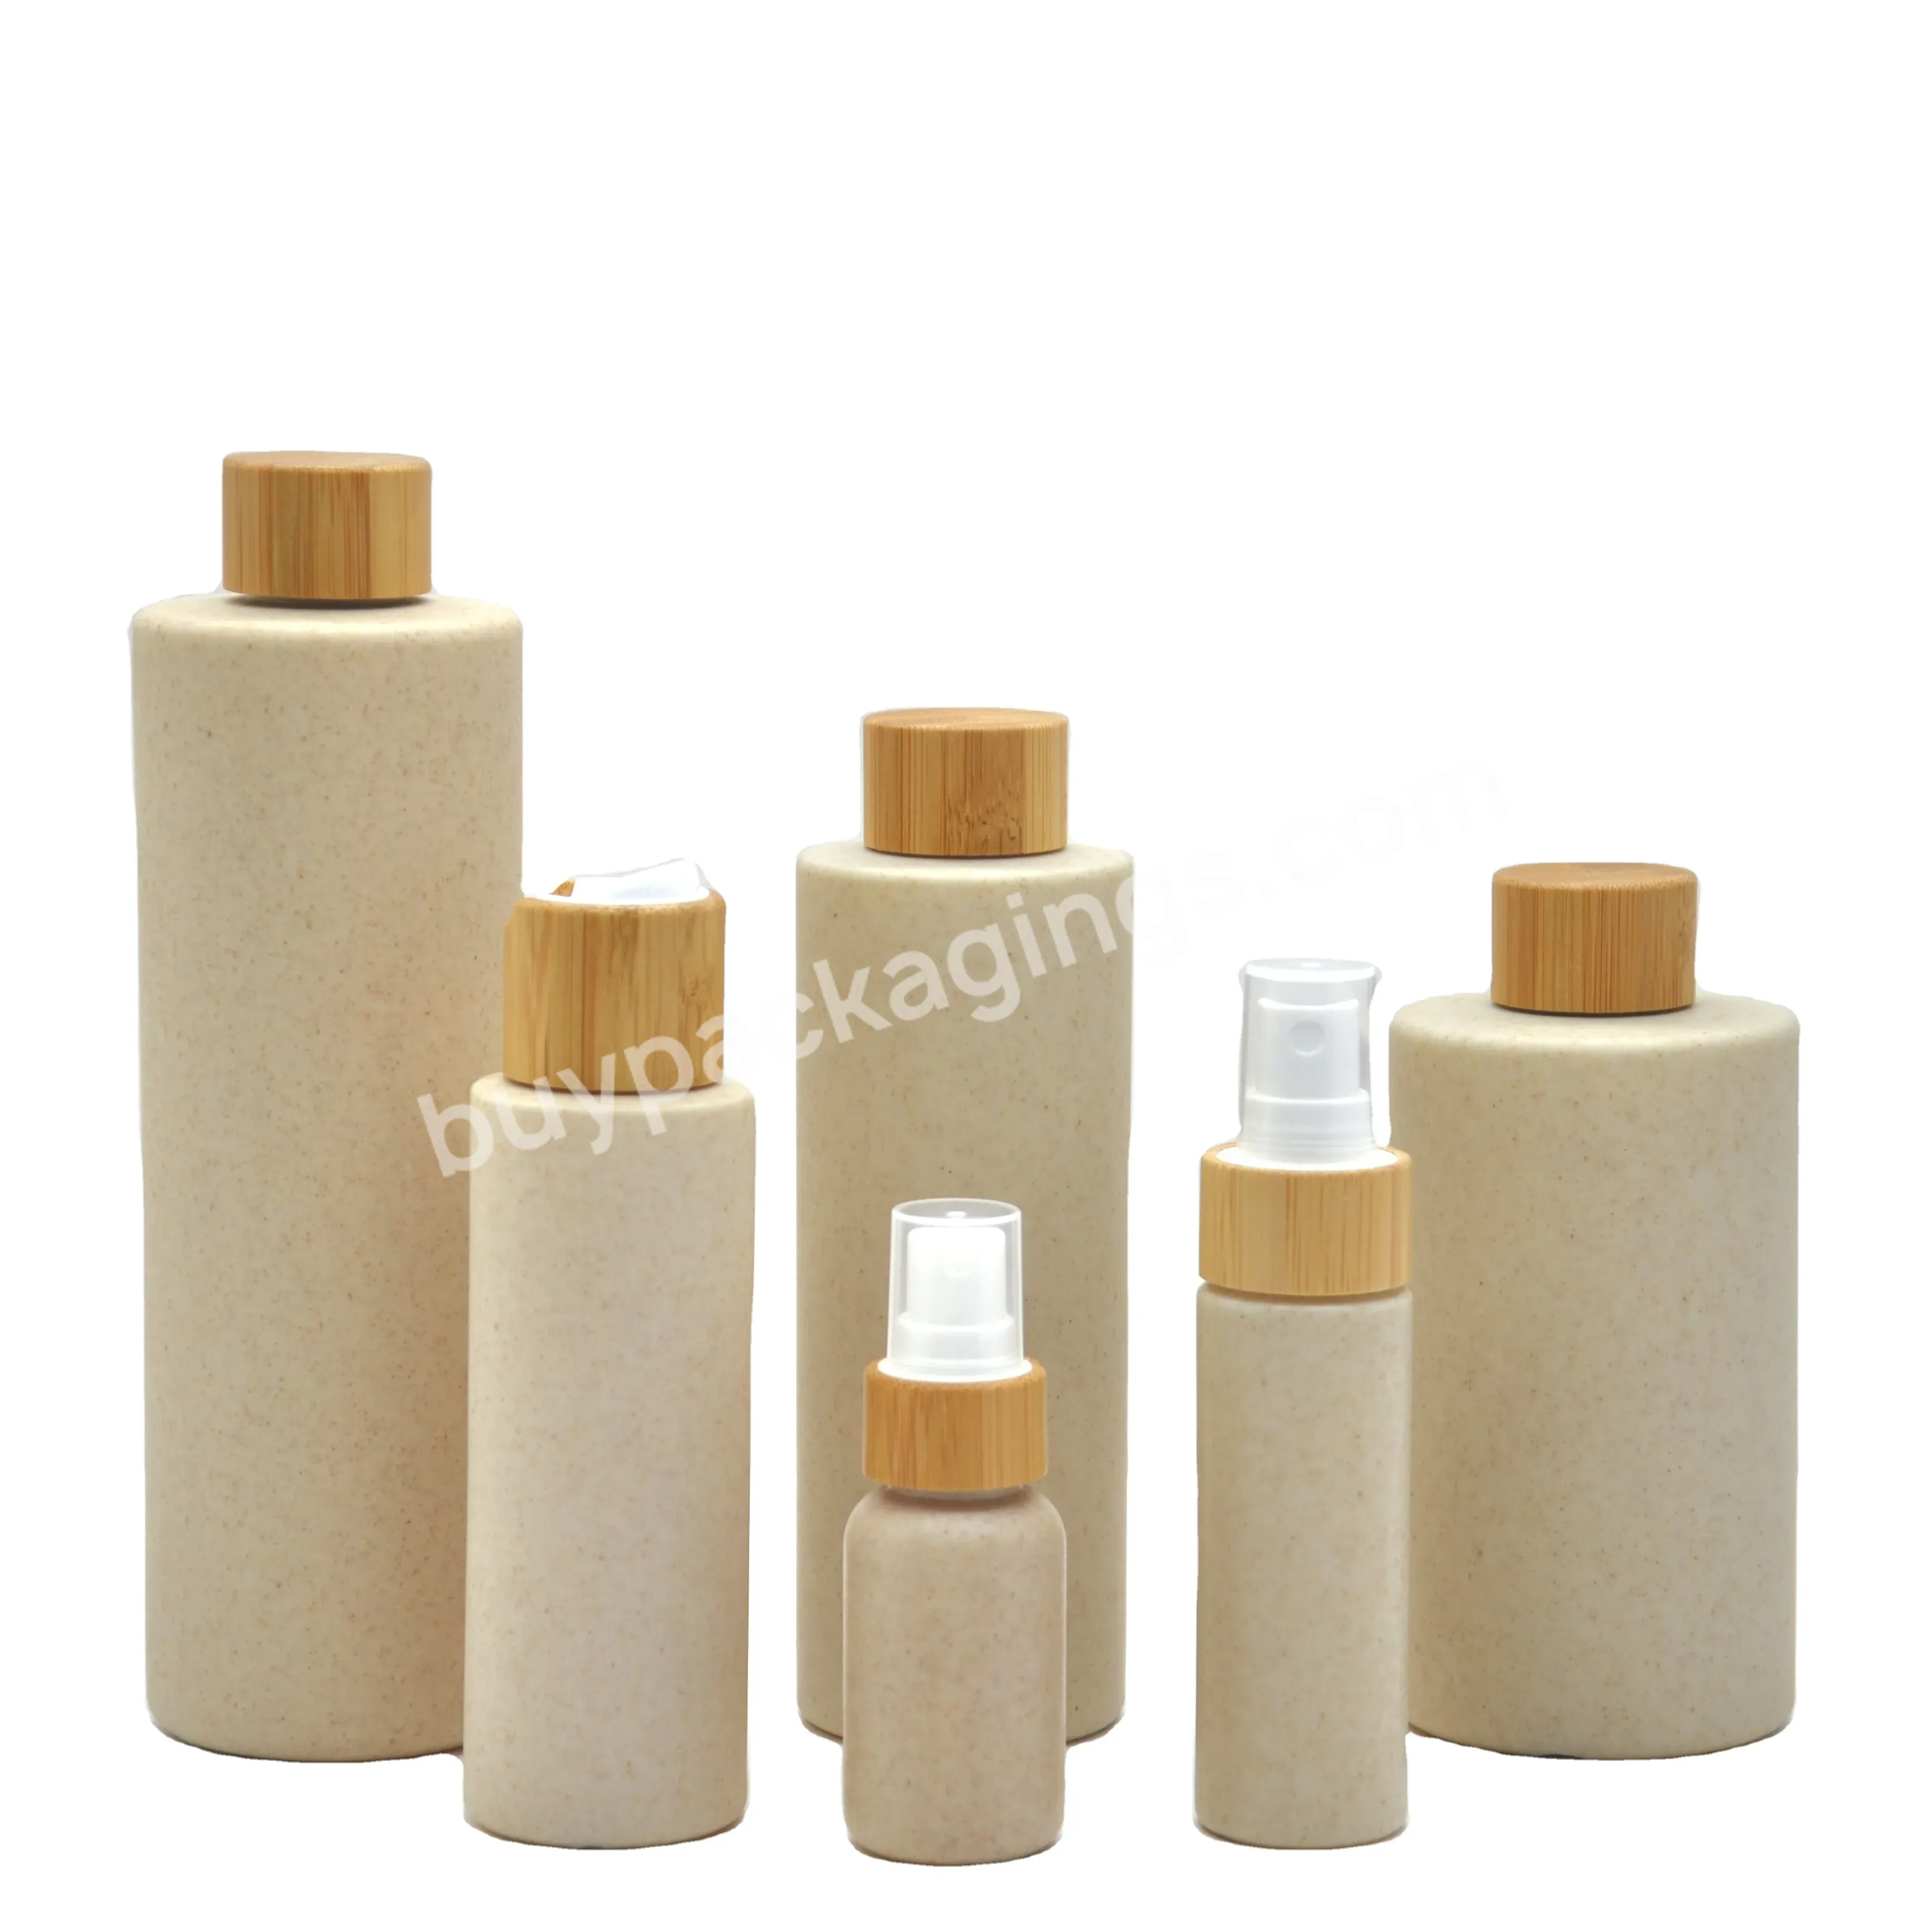 Eco Friendly Biodegradable Container Plastic Bottle Wheat Straw Recyclable Bottles For Shower Gel Shampoo - Buy Recyclable Bottles 300ml,Biodegradable Wheat Straw Bottles,Plastic Bottle.